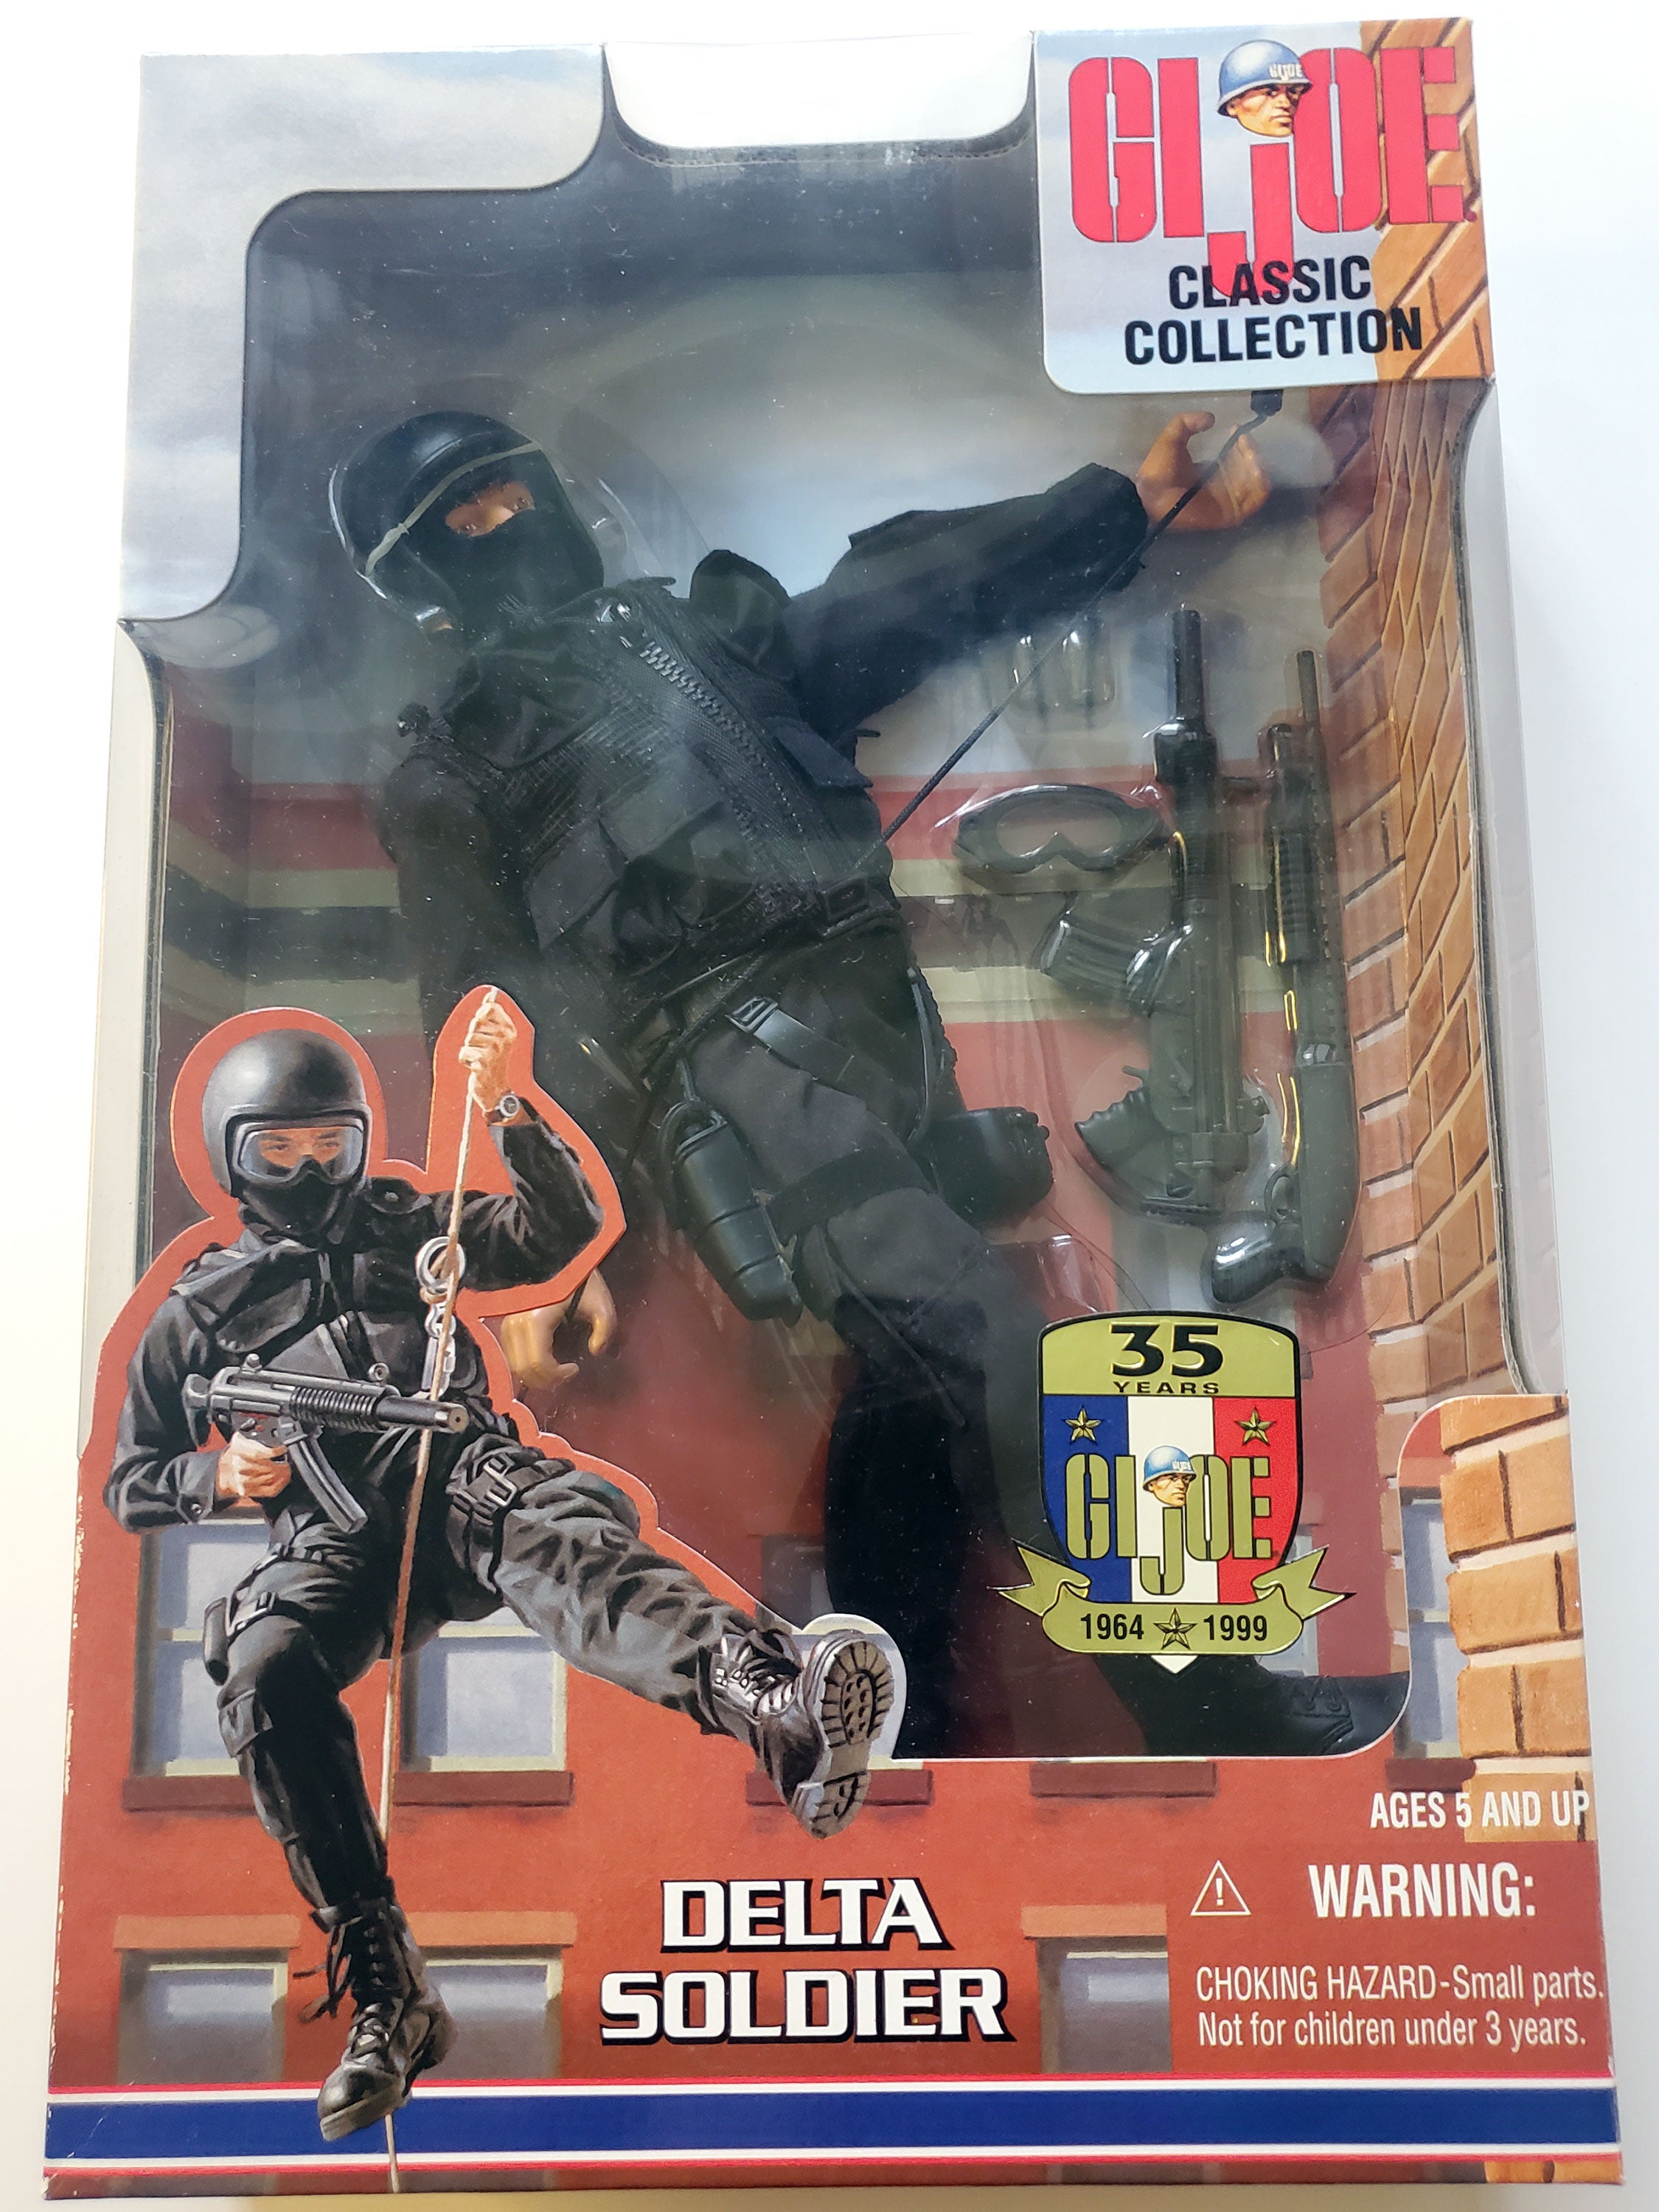 G.I. Joe Classic Collection Delta Soldier – Action Figures and